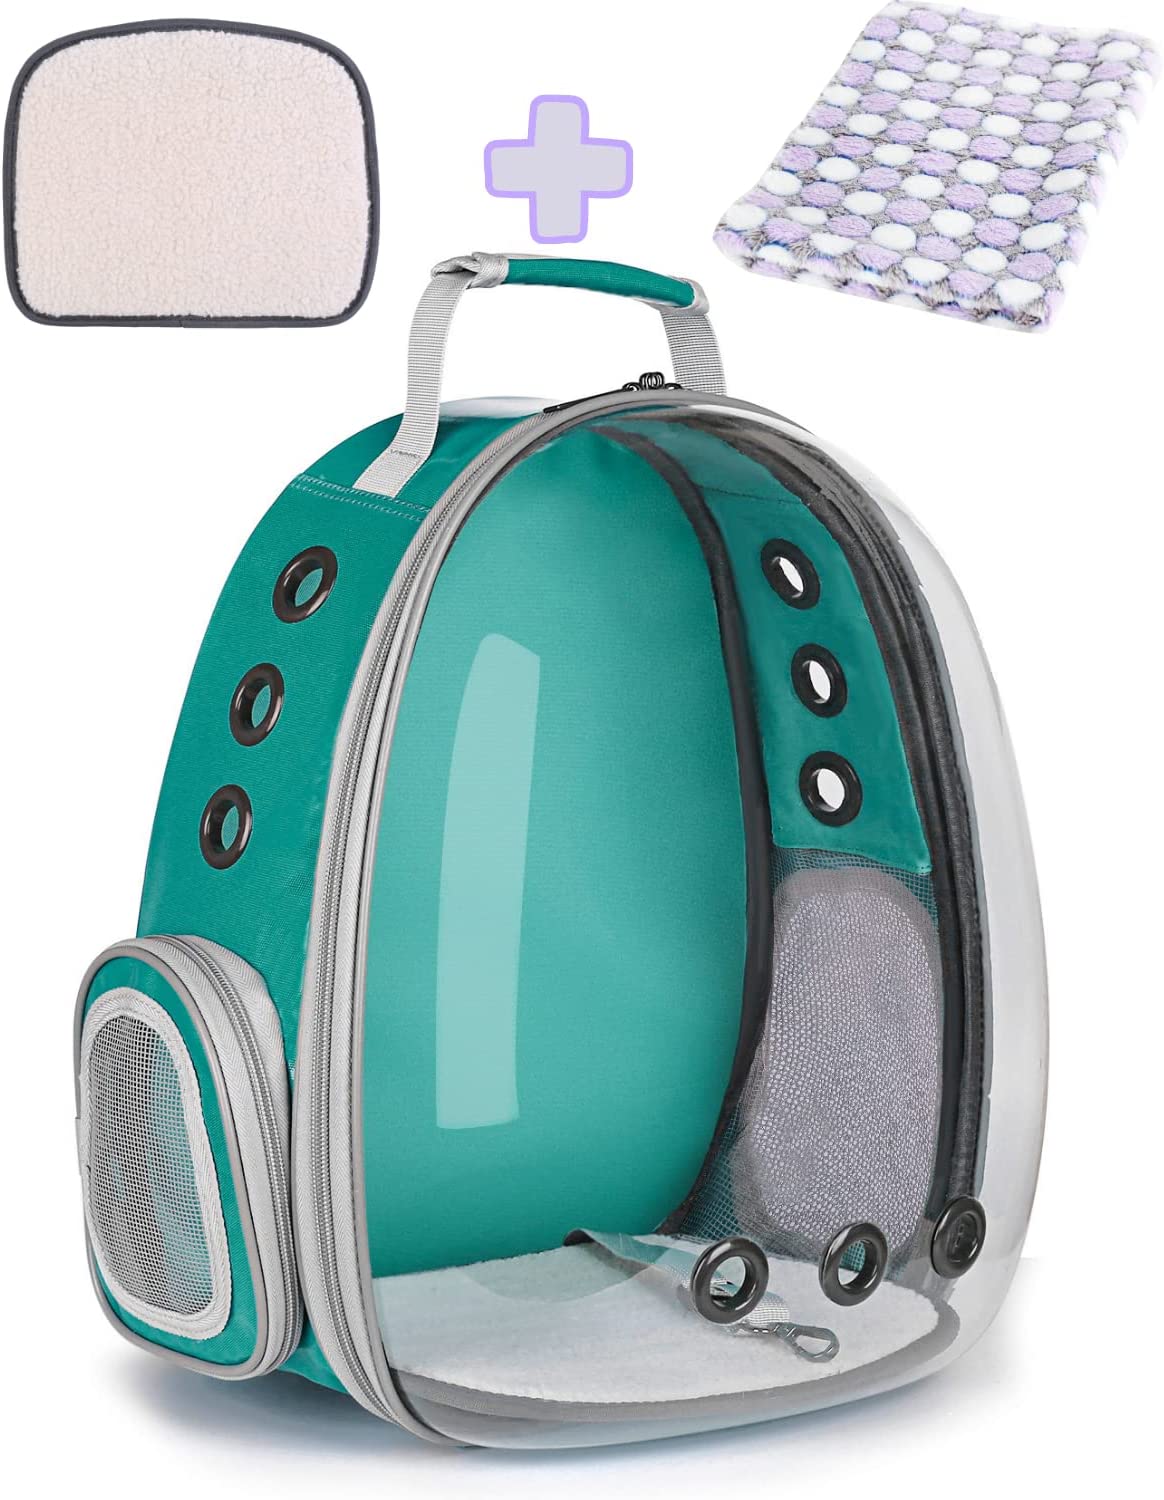 3. Lollimeow Pet Carrier Backpack